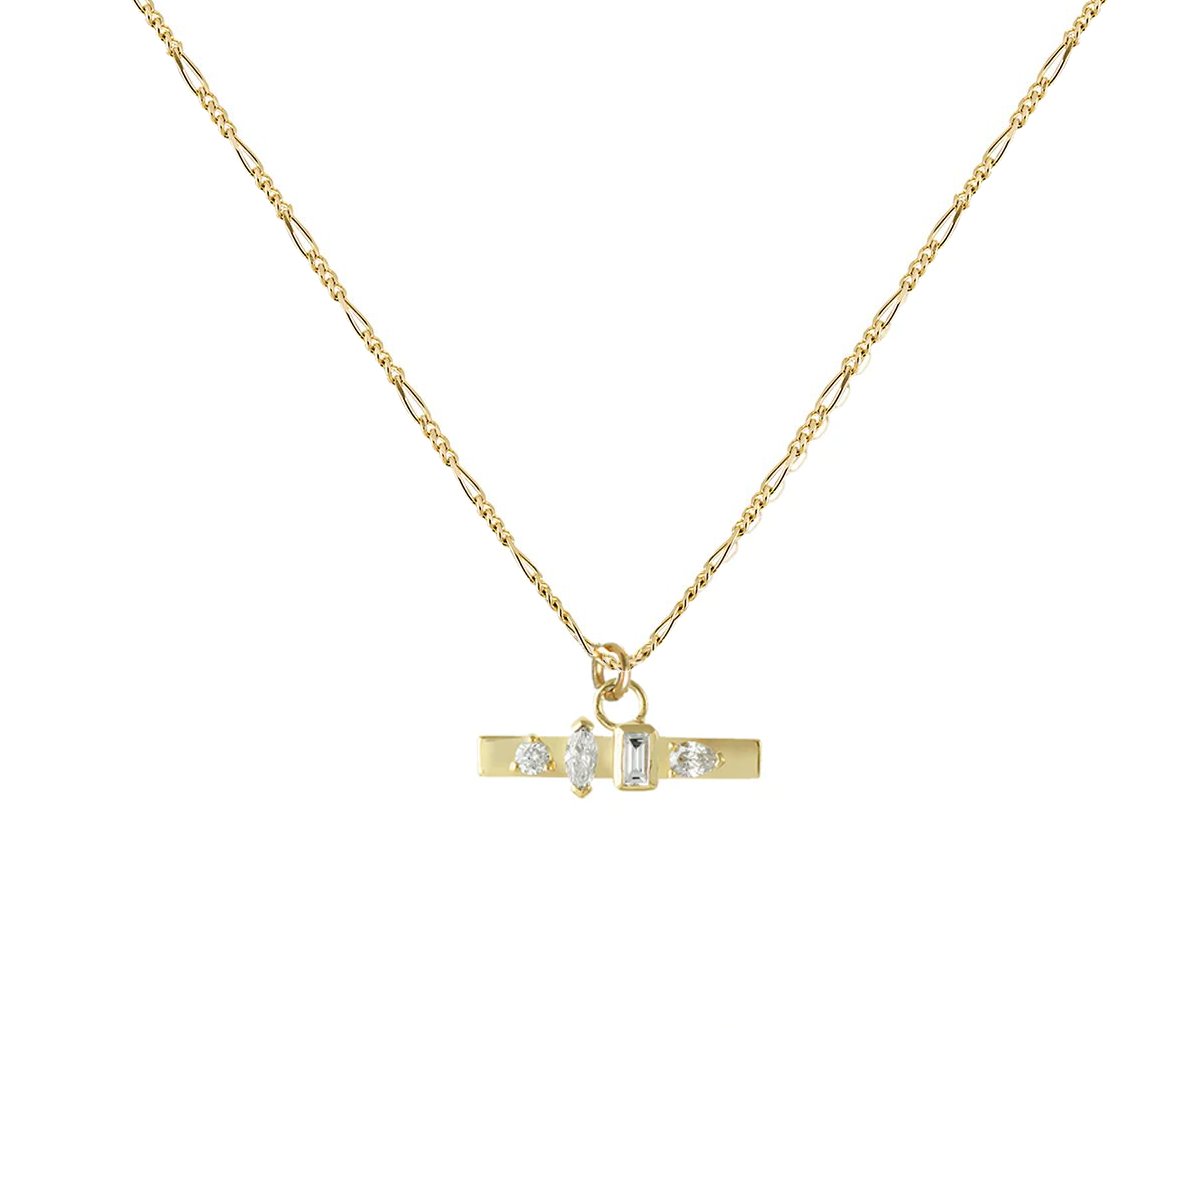 Metier Chain AM to PM bar necklace